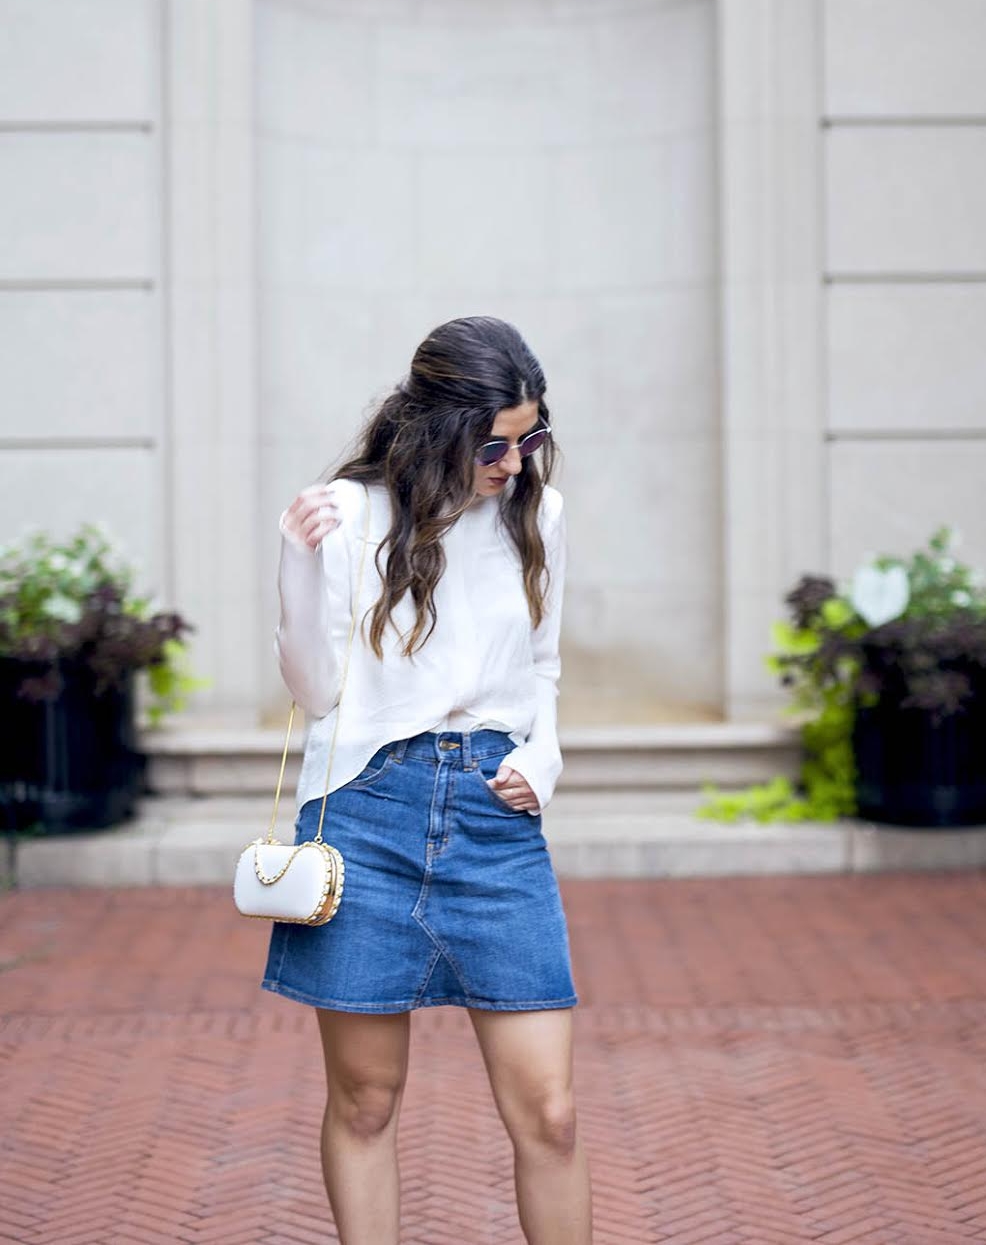 White Silk Top Chelsea and Walker Louboutins & Love Fashion Blog Esther Santer NYC Street Style Blogger Outfit OOTD Trendy Jean Denim Skirt Zara Clutch Bag Erin Dana Gold Chain Ivanka Trump Fringe Booties Inspo Top Women Girl Transitional Pieces Fall.jpg